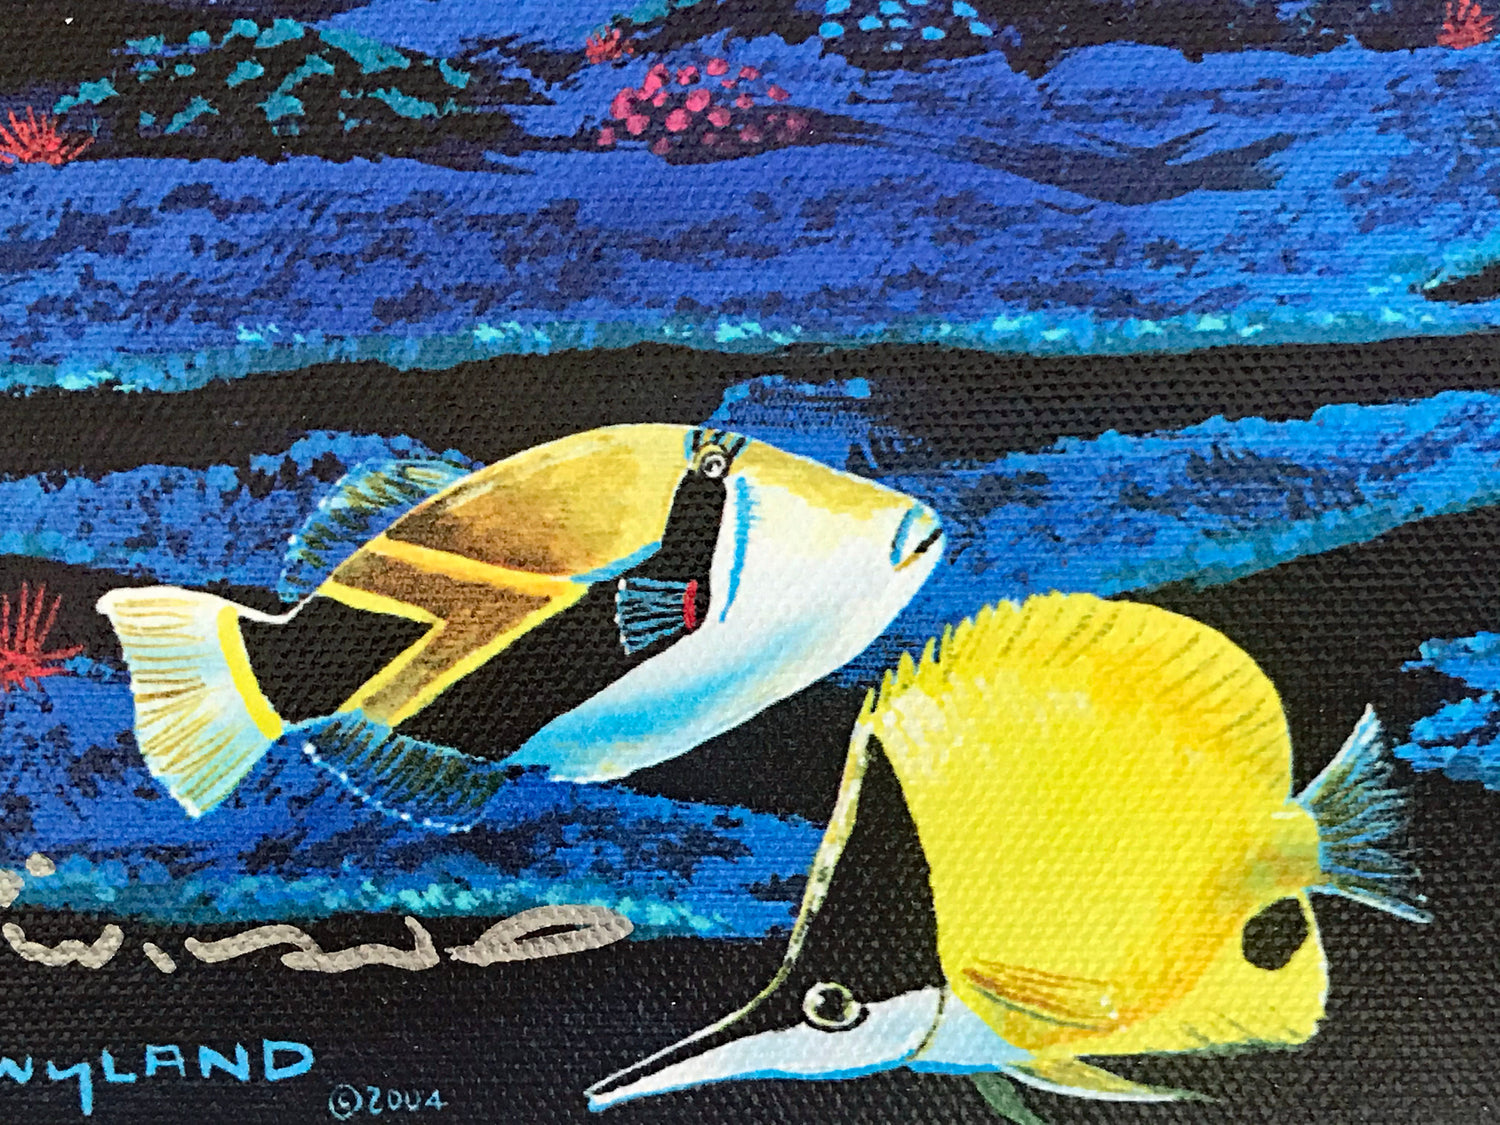 The Living Sea Wyland Canvas Giclee Print Artist Hand Signed and Numbered